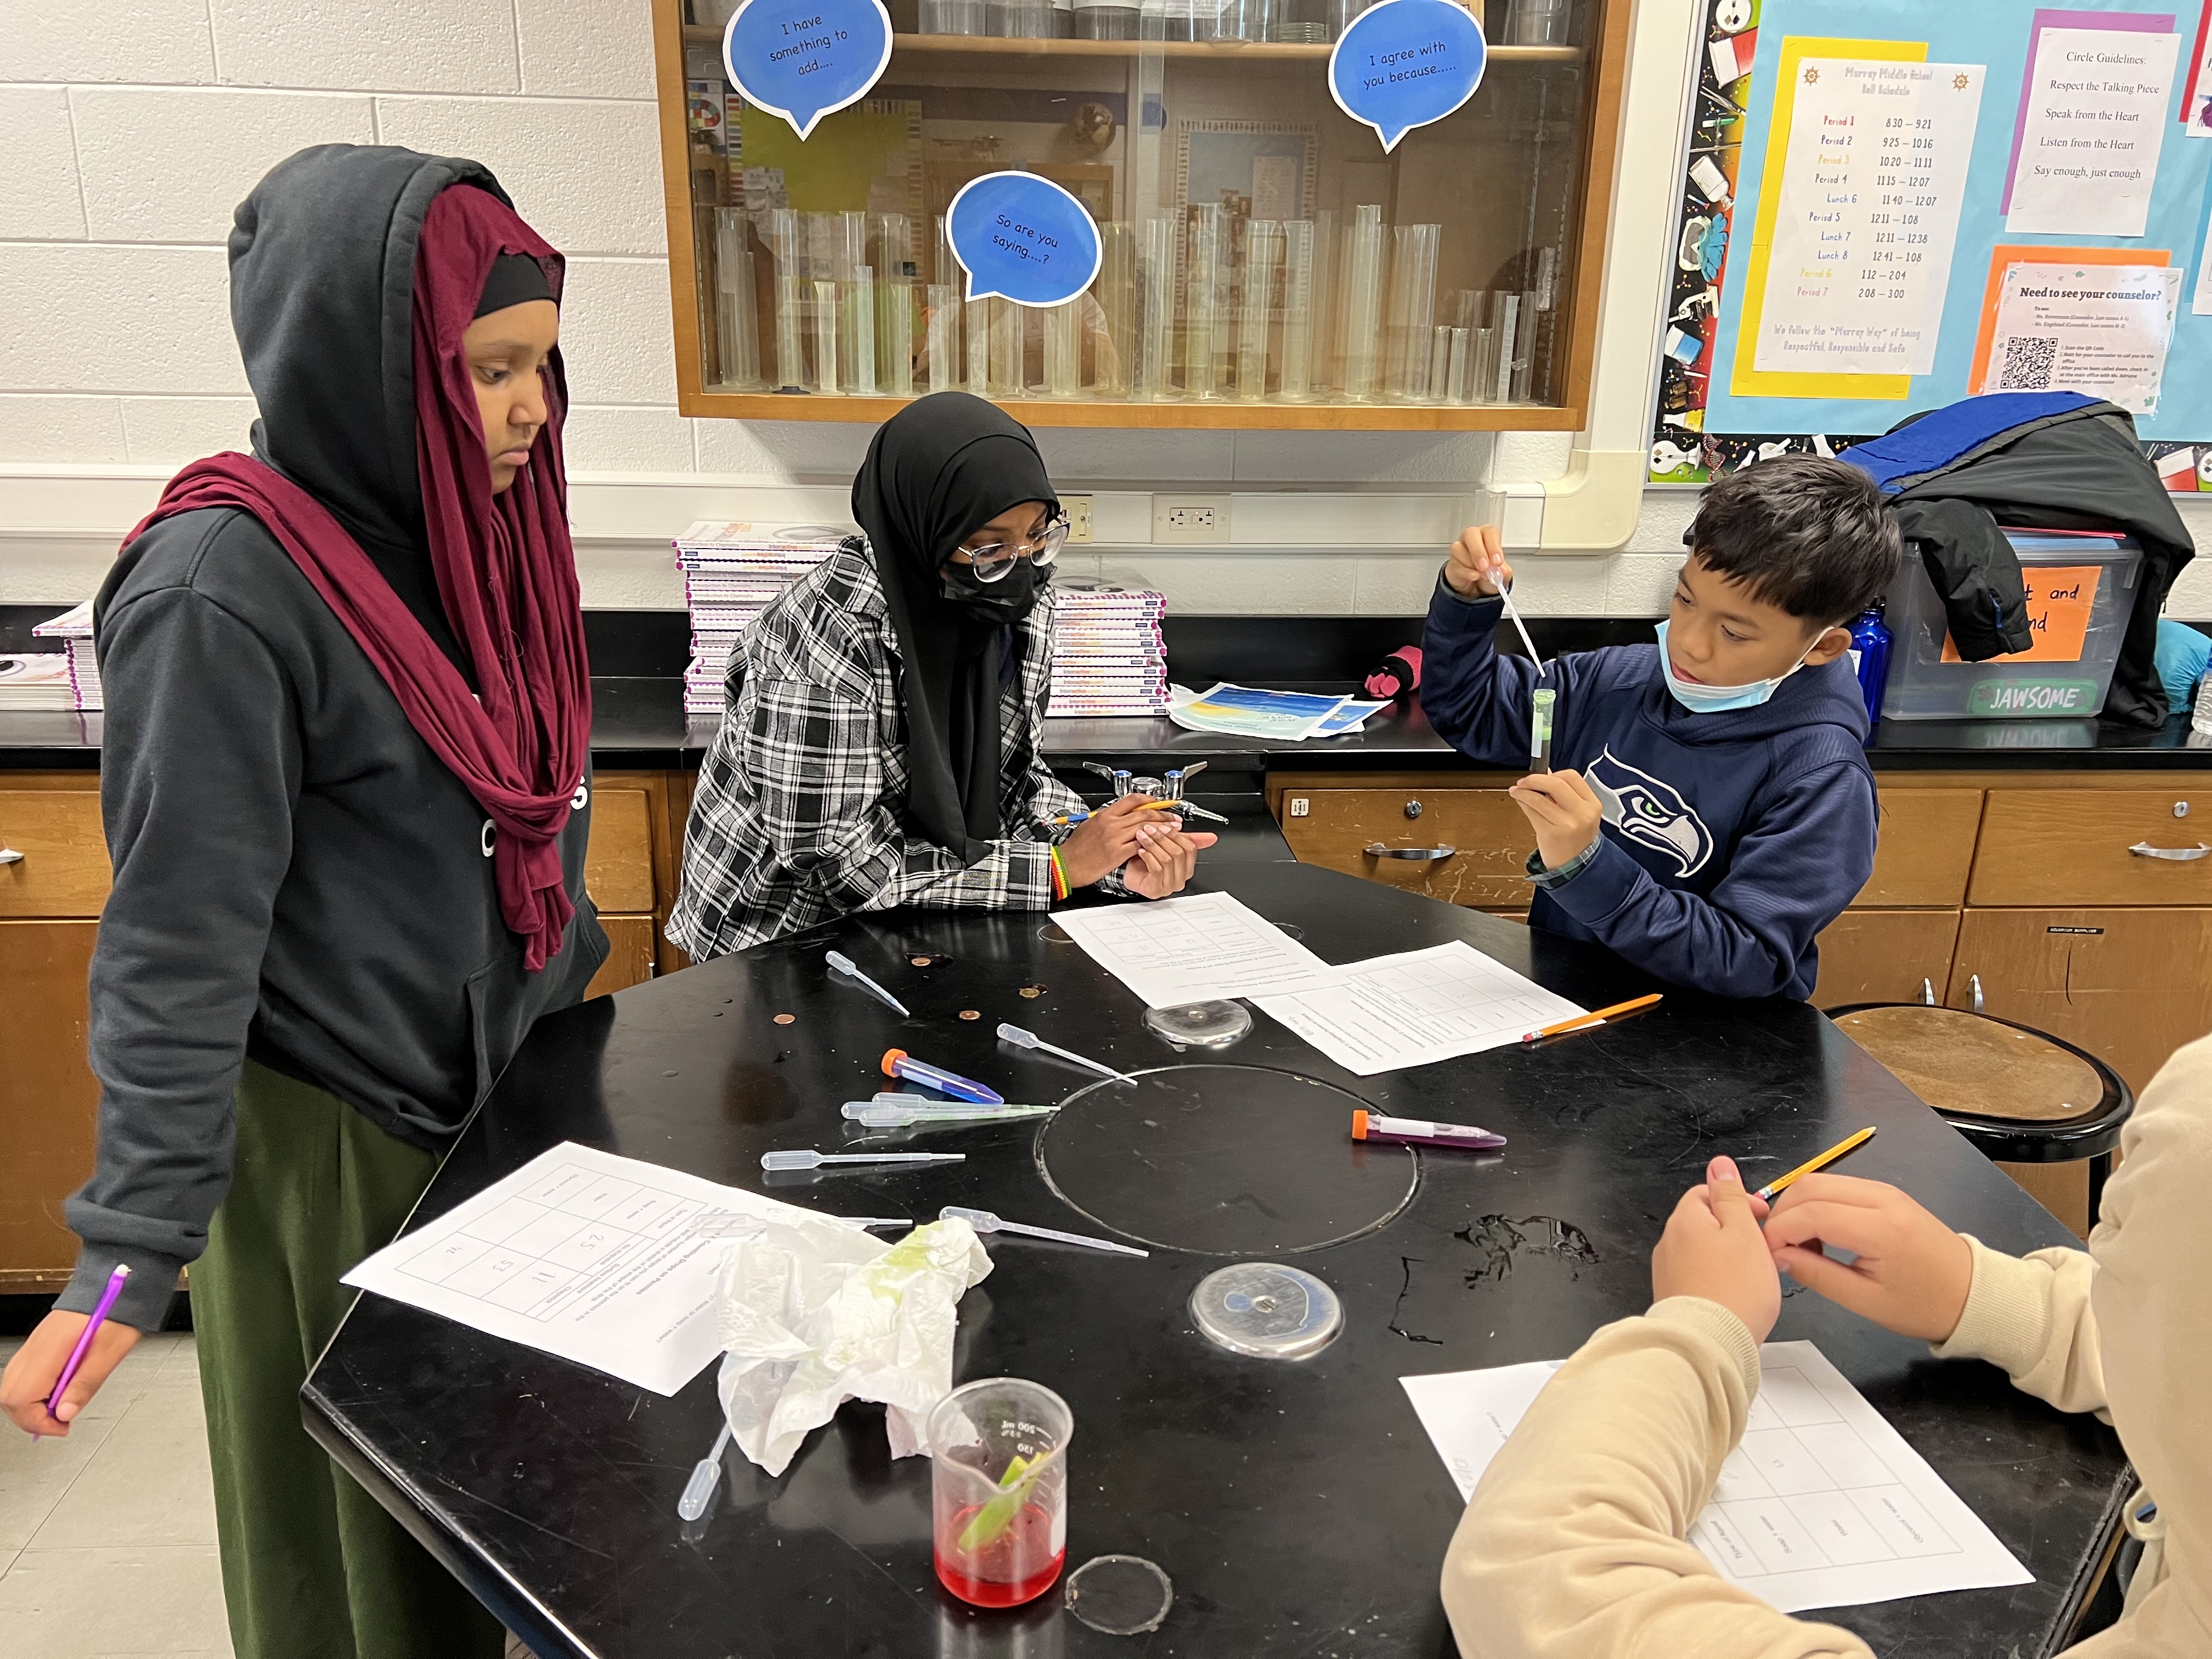 Four students surround a black table with pipettes and worksheets on it. The pipettes have different colored liquids corresponding to the liquids' surface tension. One student is holding a centrifuge tube with a green liquid (water and glycerol) in one hand and a pipette in the other.